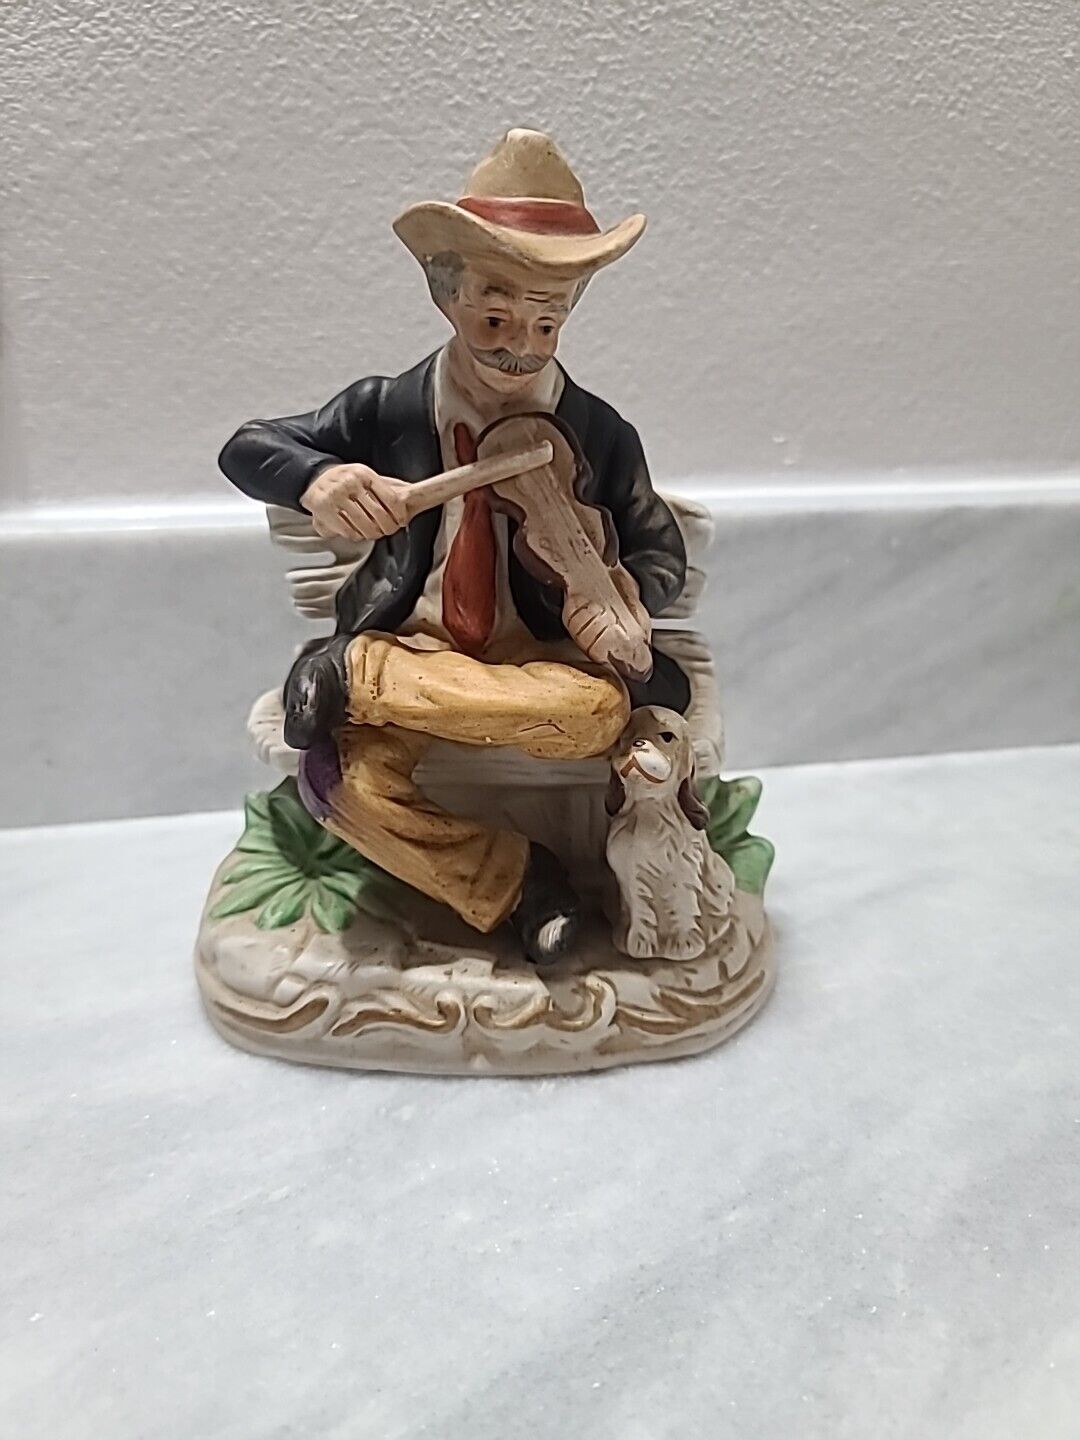 Vintage Homco Home Interior Ceramic Figurine Old Man Playing Fiddle With Dog